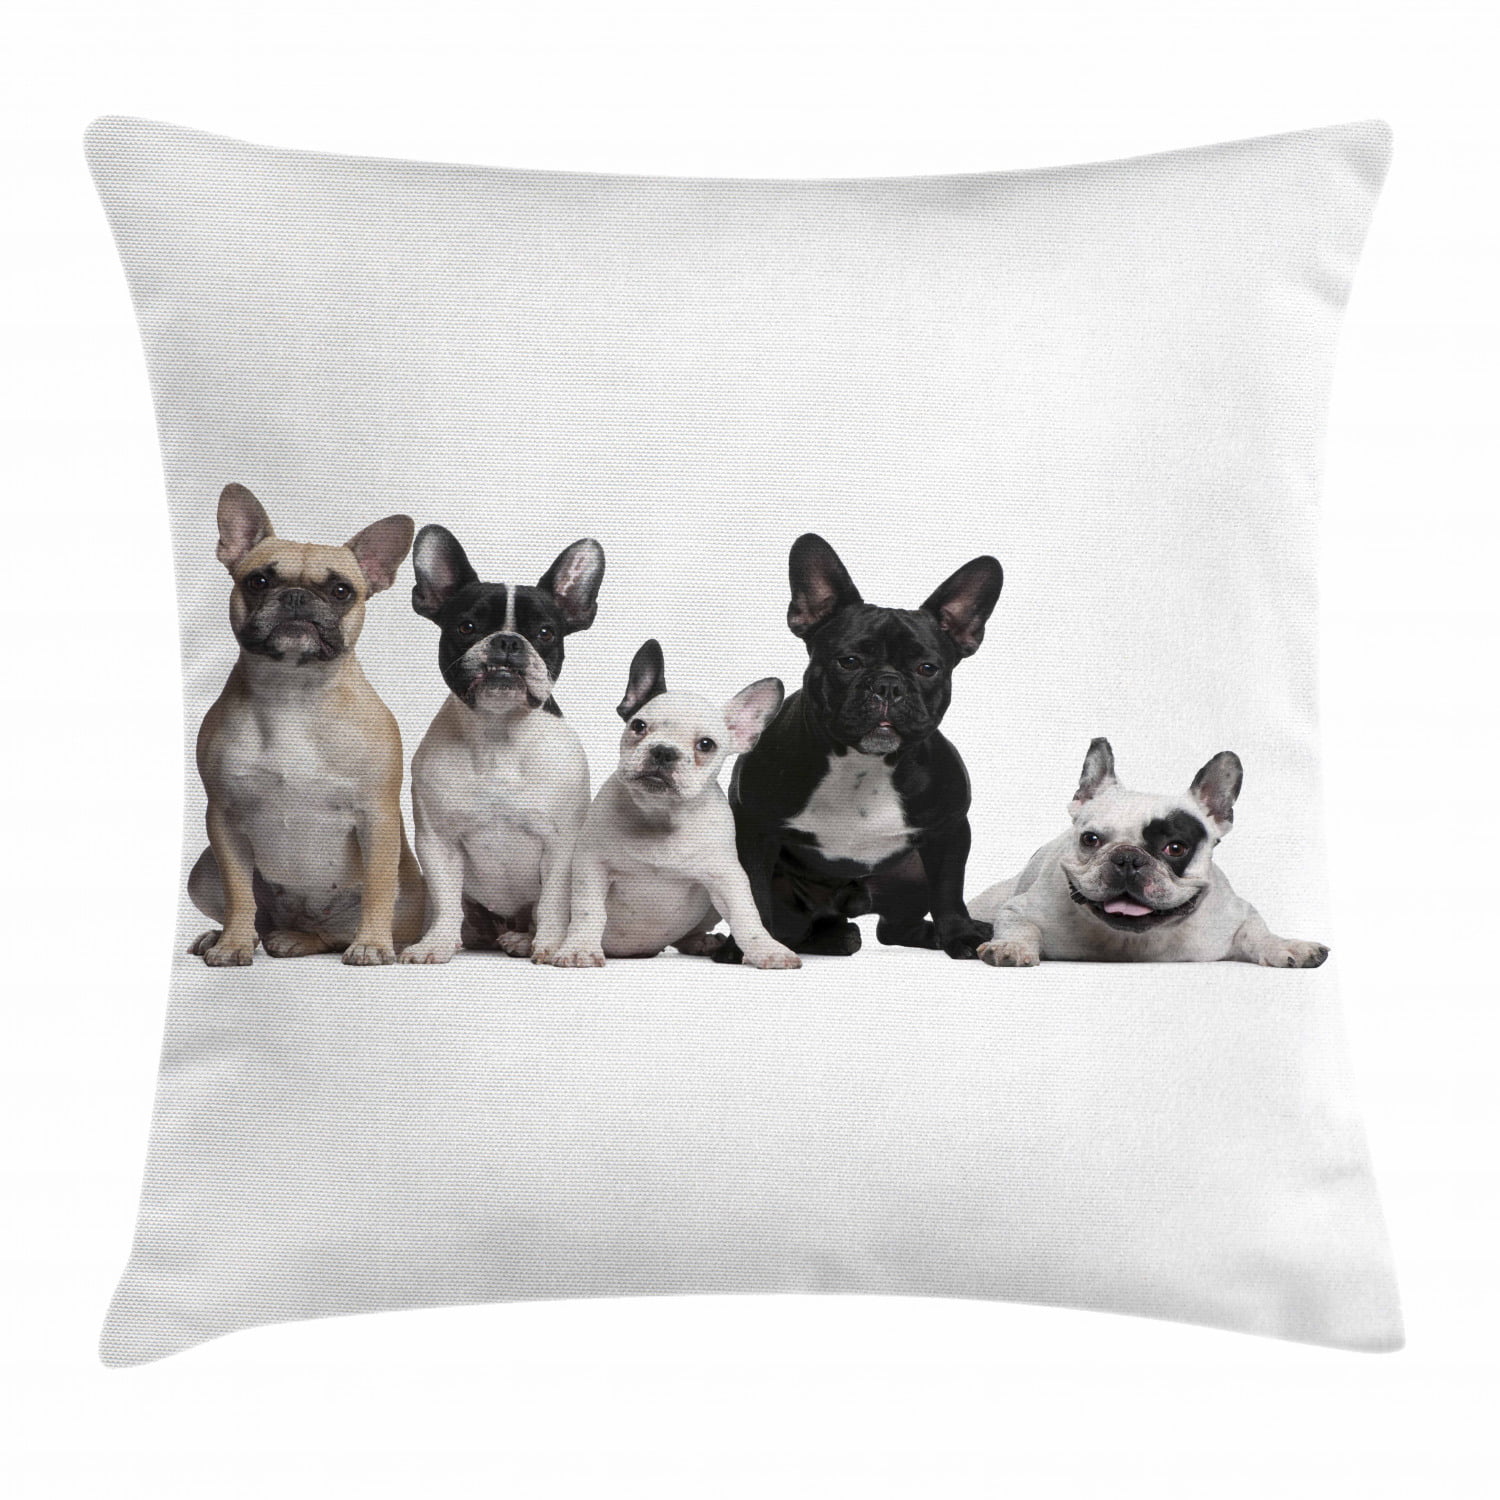 18" Square Linen Throw Pillow CaseS French Bulldog Sofa Cushion Cover New 